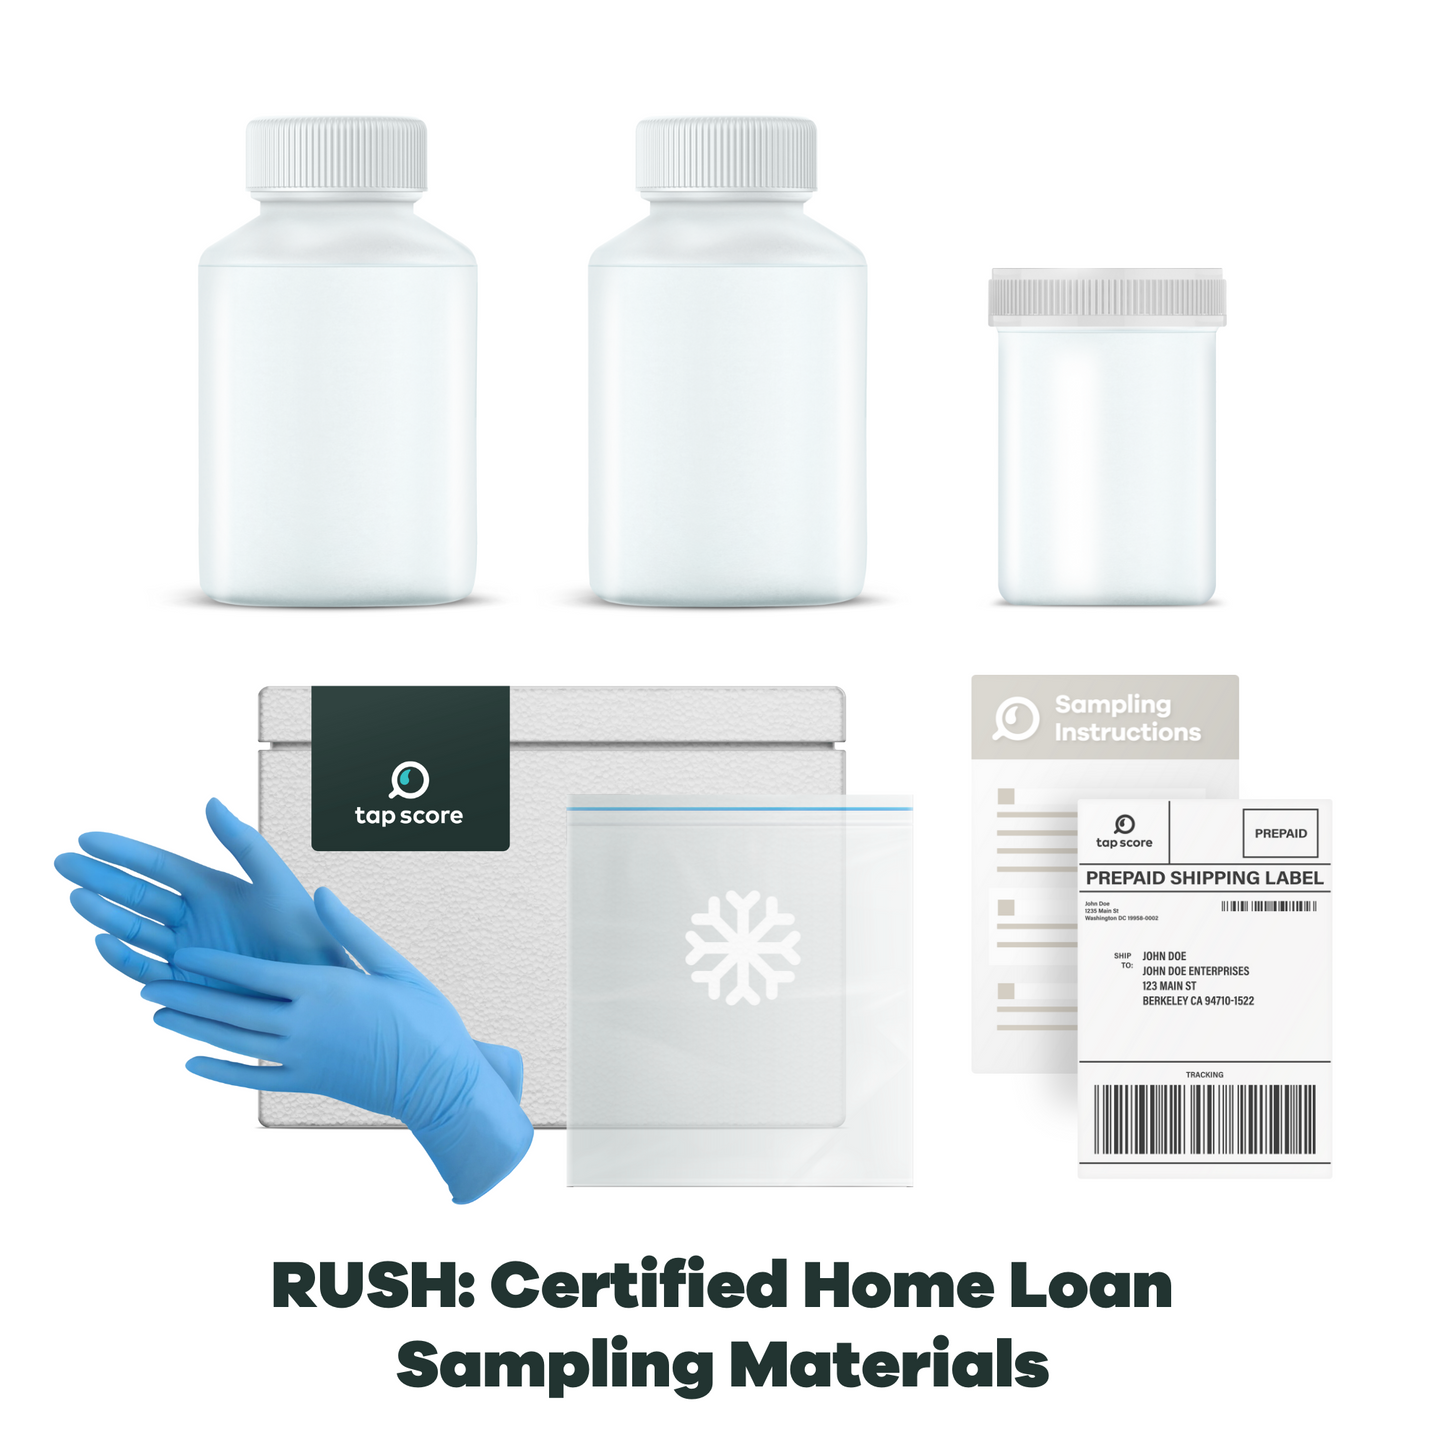 Certified Home Loan Water Test Kit Materials